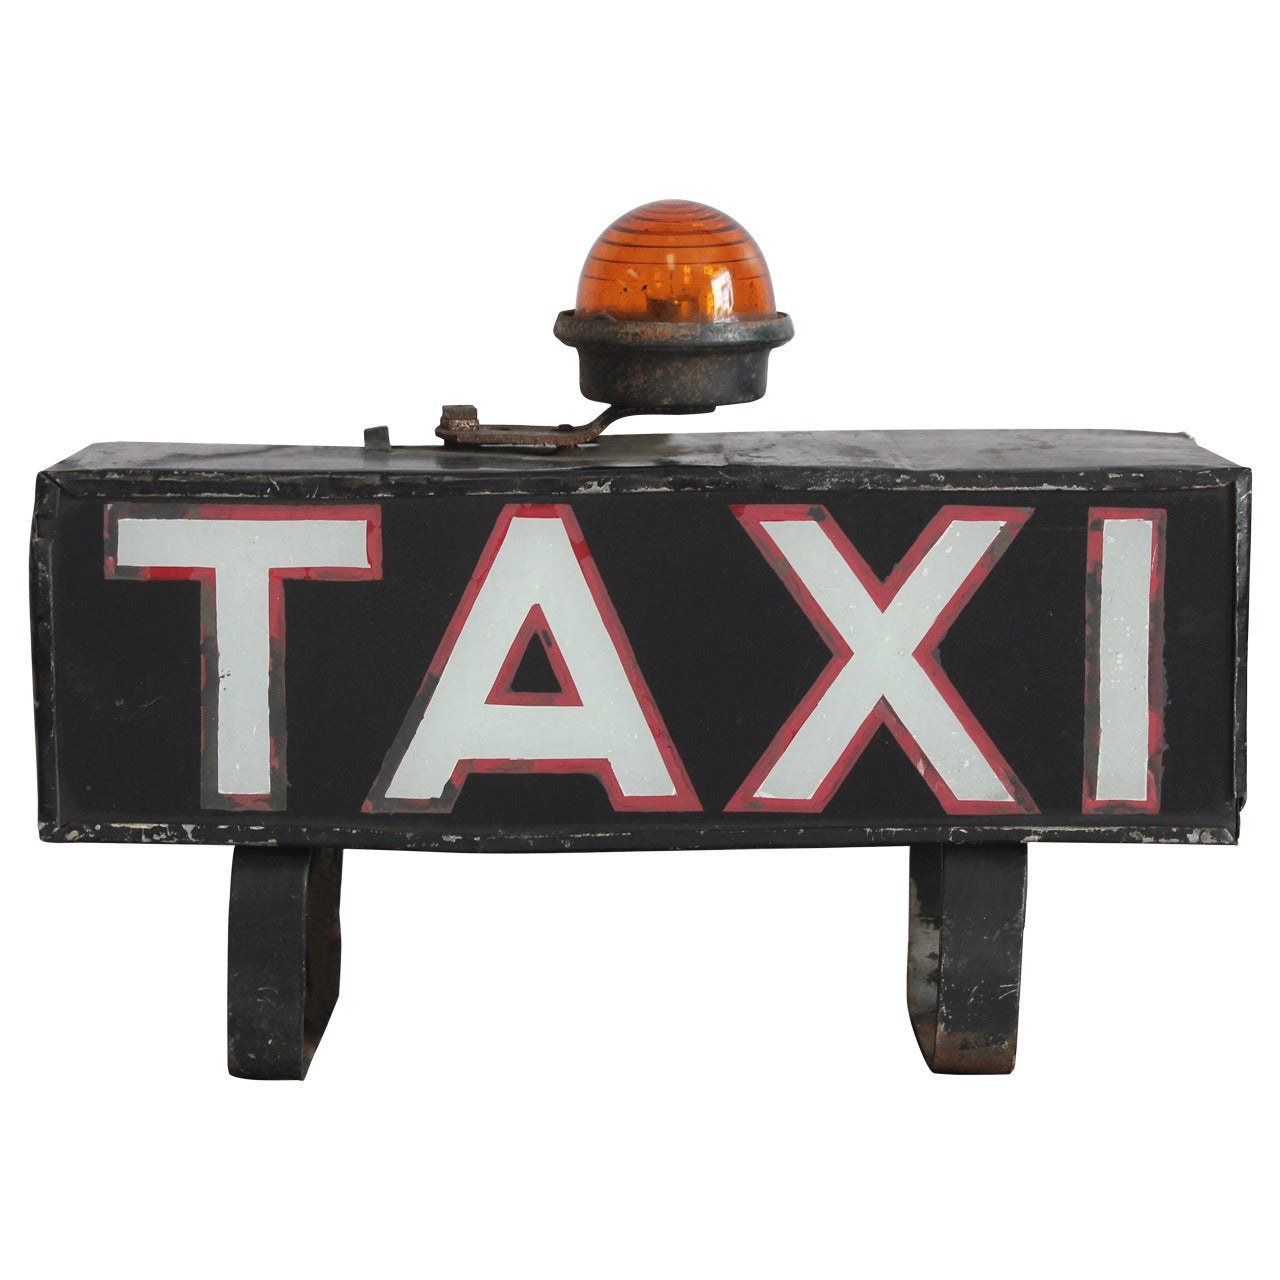 Early 1900s Light Up "TAXI" Sign For Sale